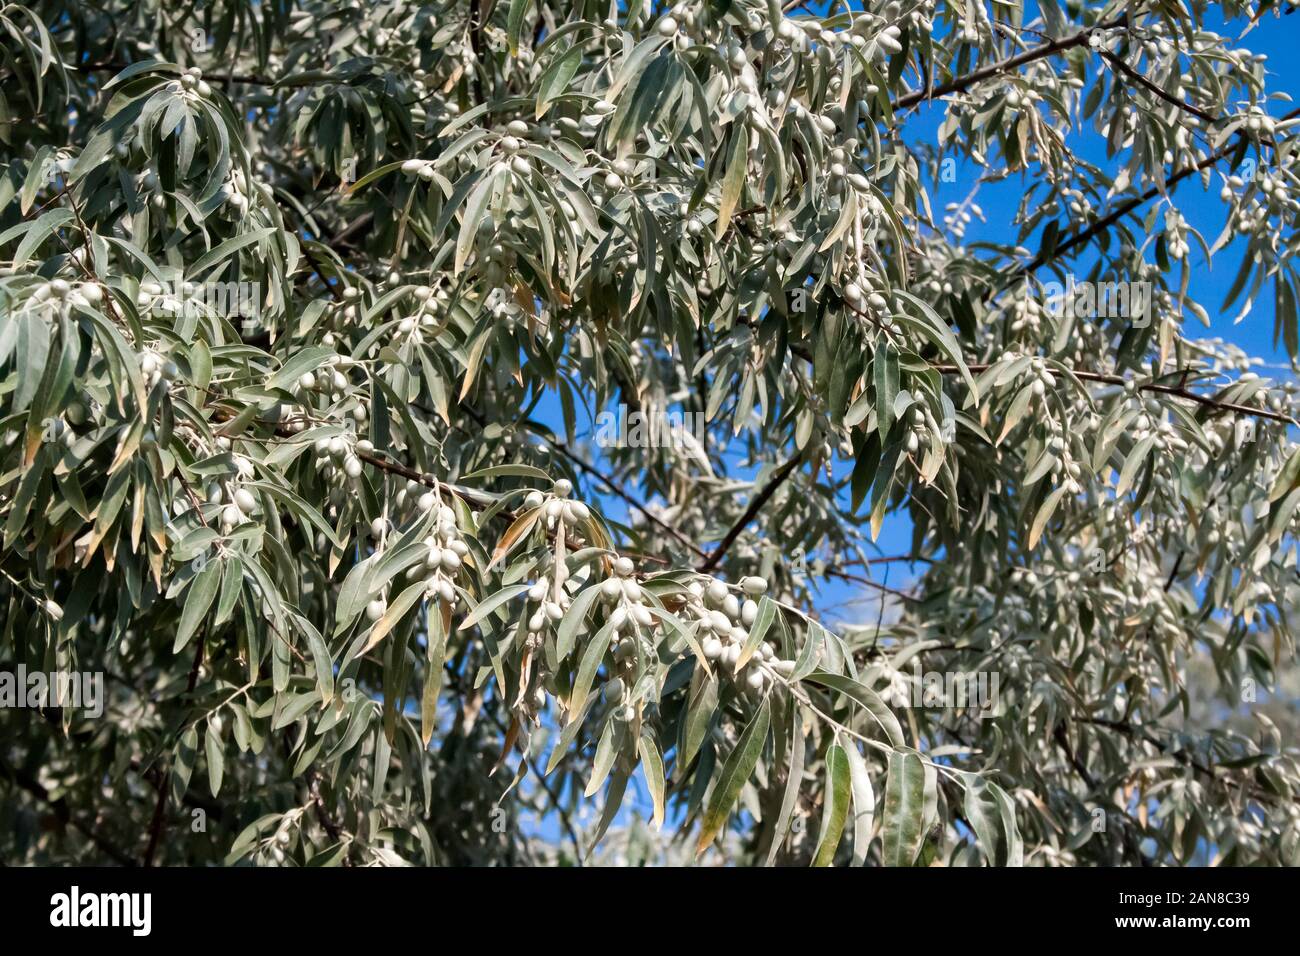 Elaeagnus angustifolia (commonly called Russian olive, silver berry, oleaster, Persian olive, or wild olive) branch with green fruits against blue sky Stock Photo